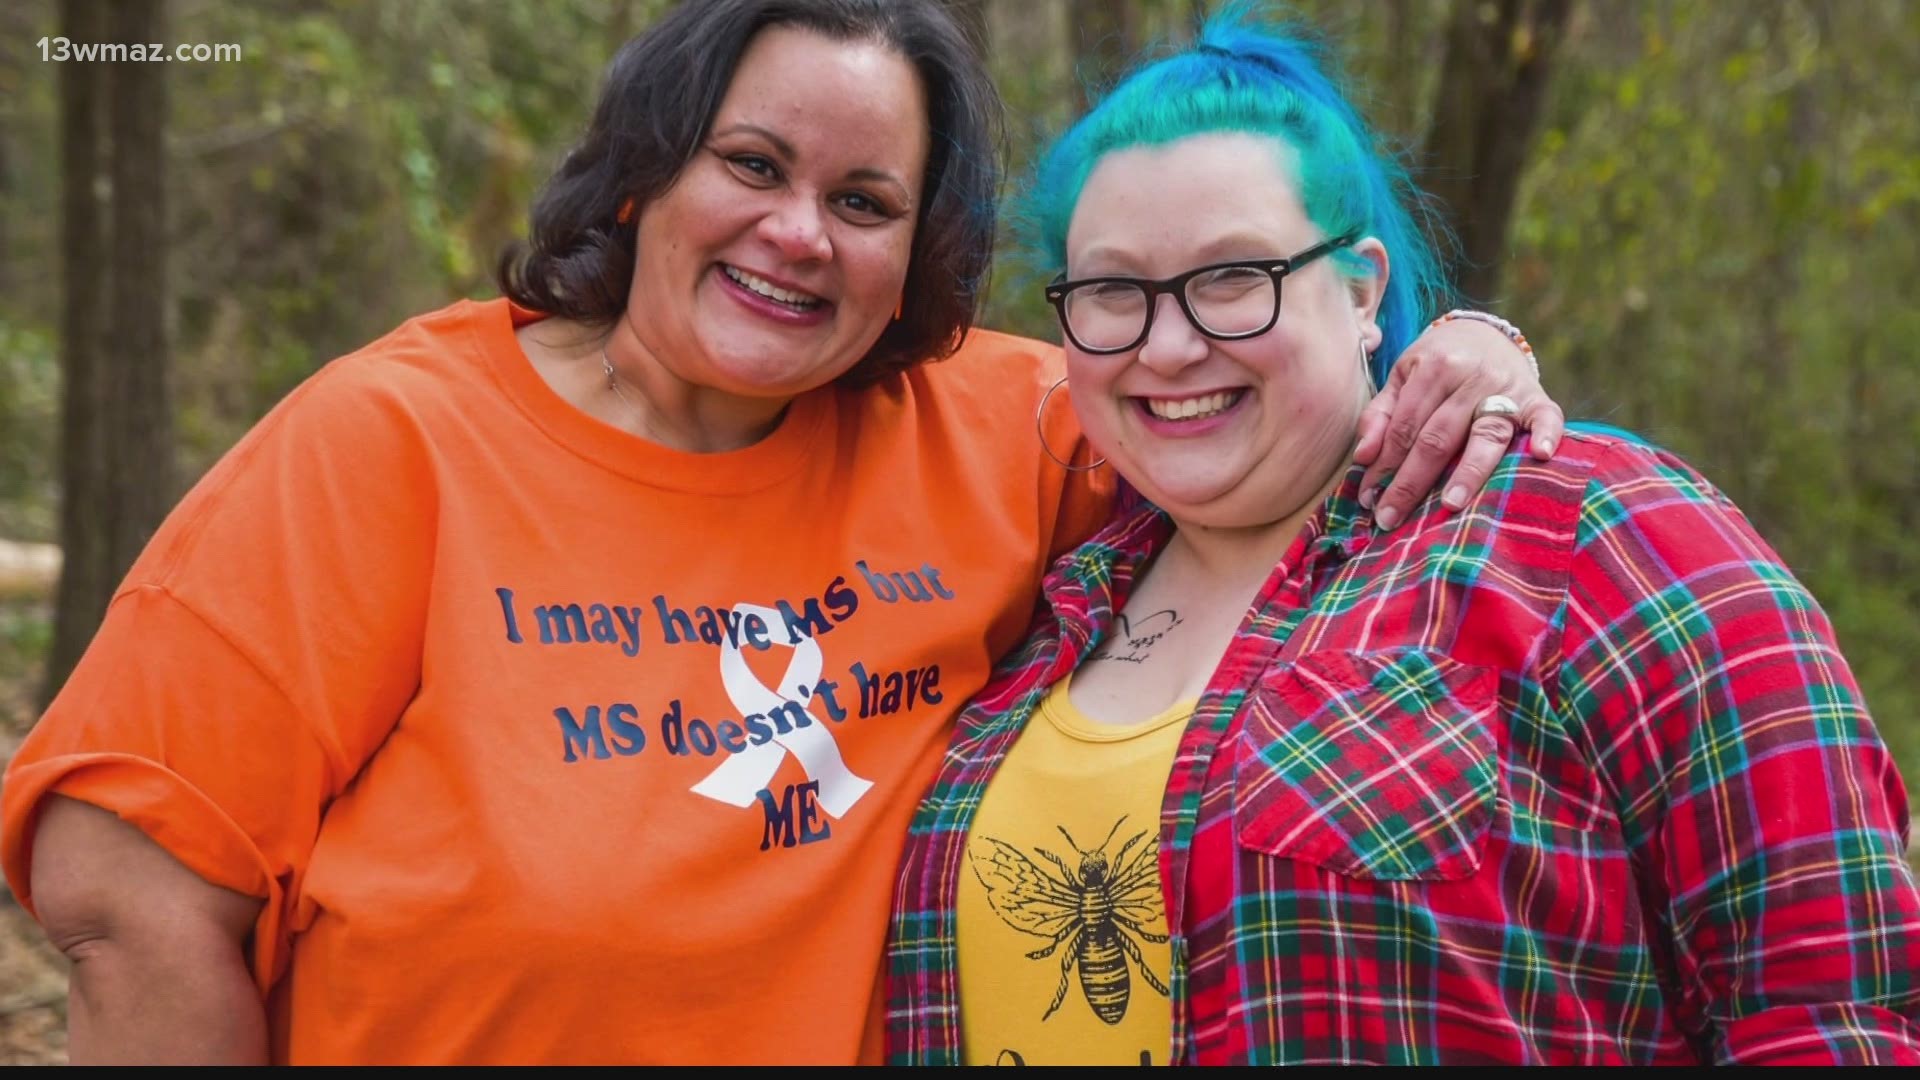 One Warner Robins photographer has made it her mission to give exposure to people fighting MS in Central Georgia.